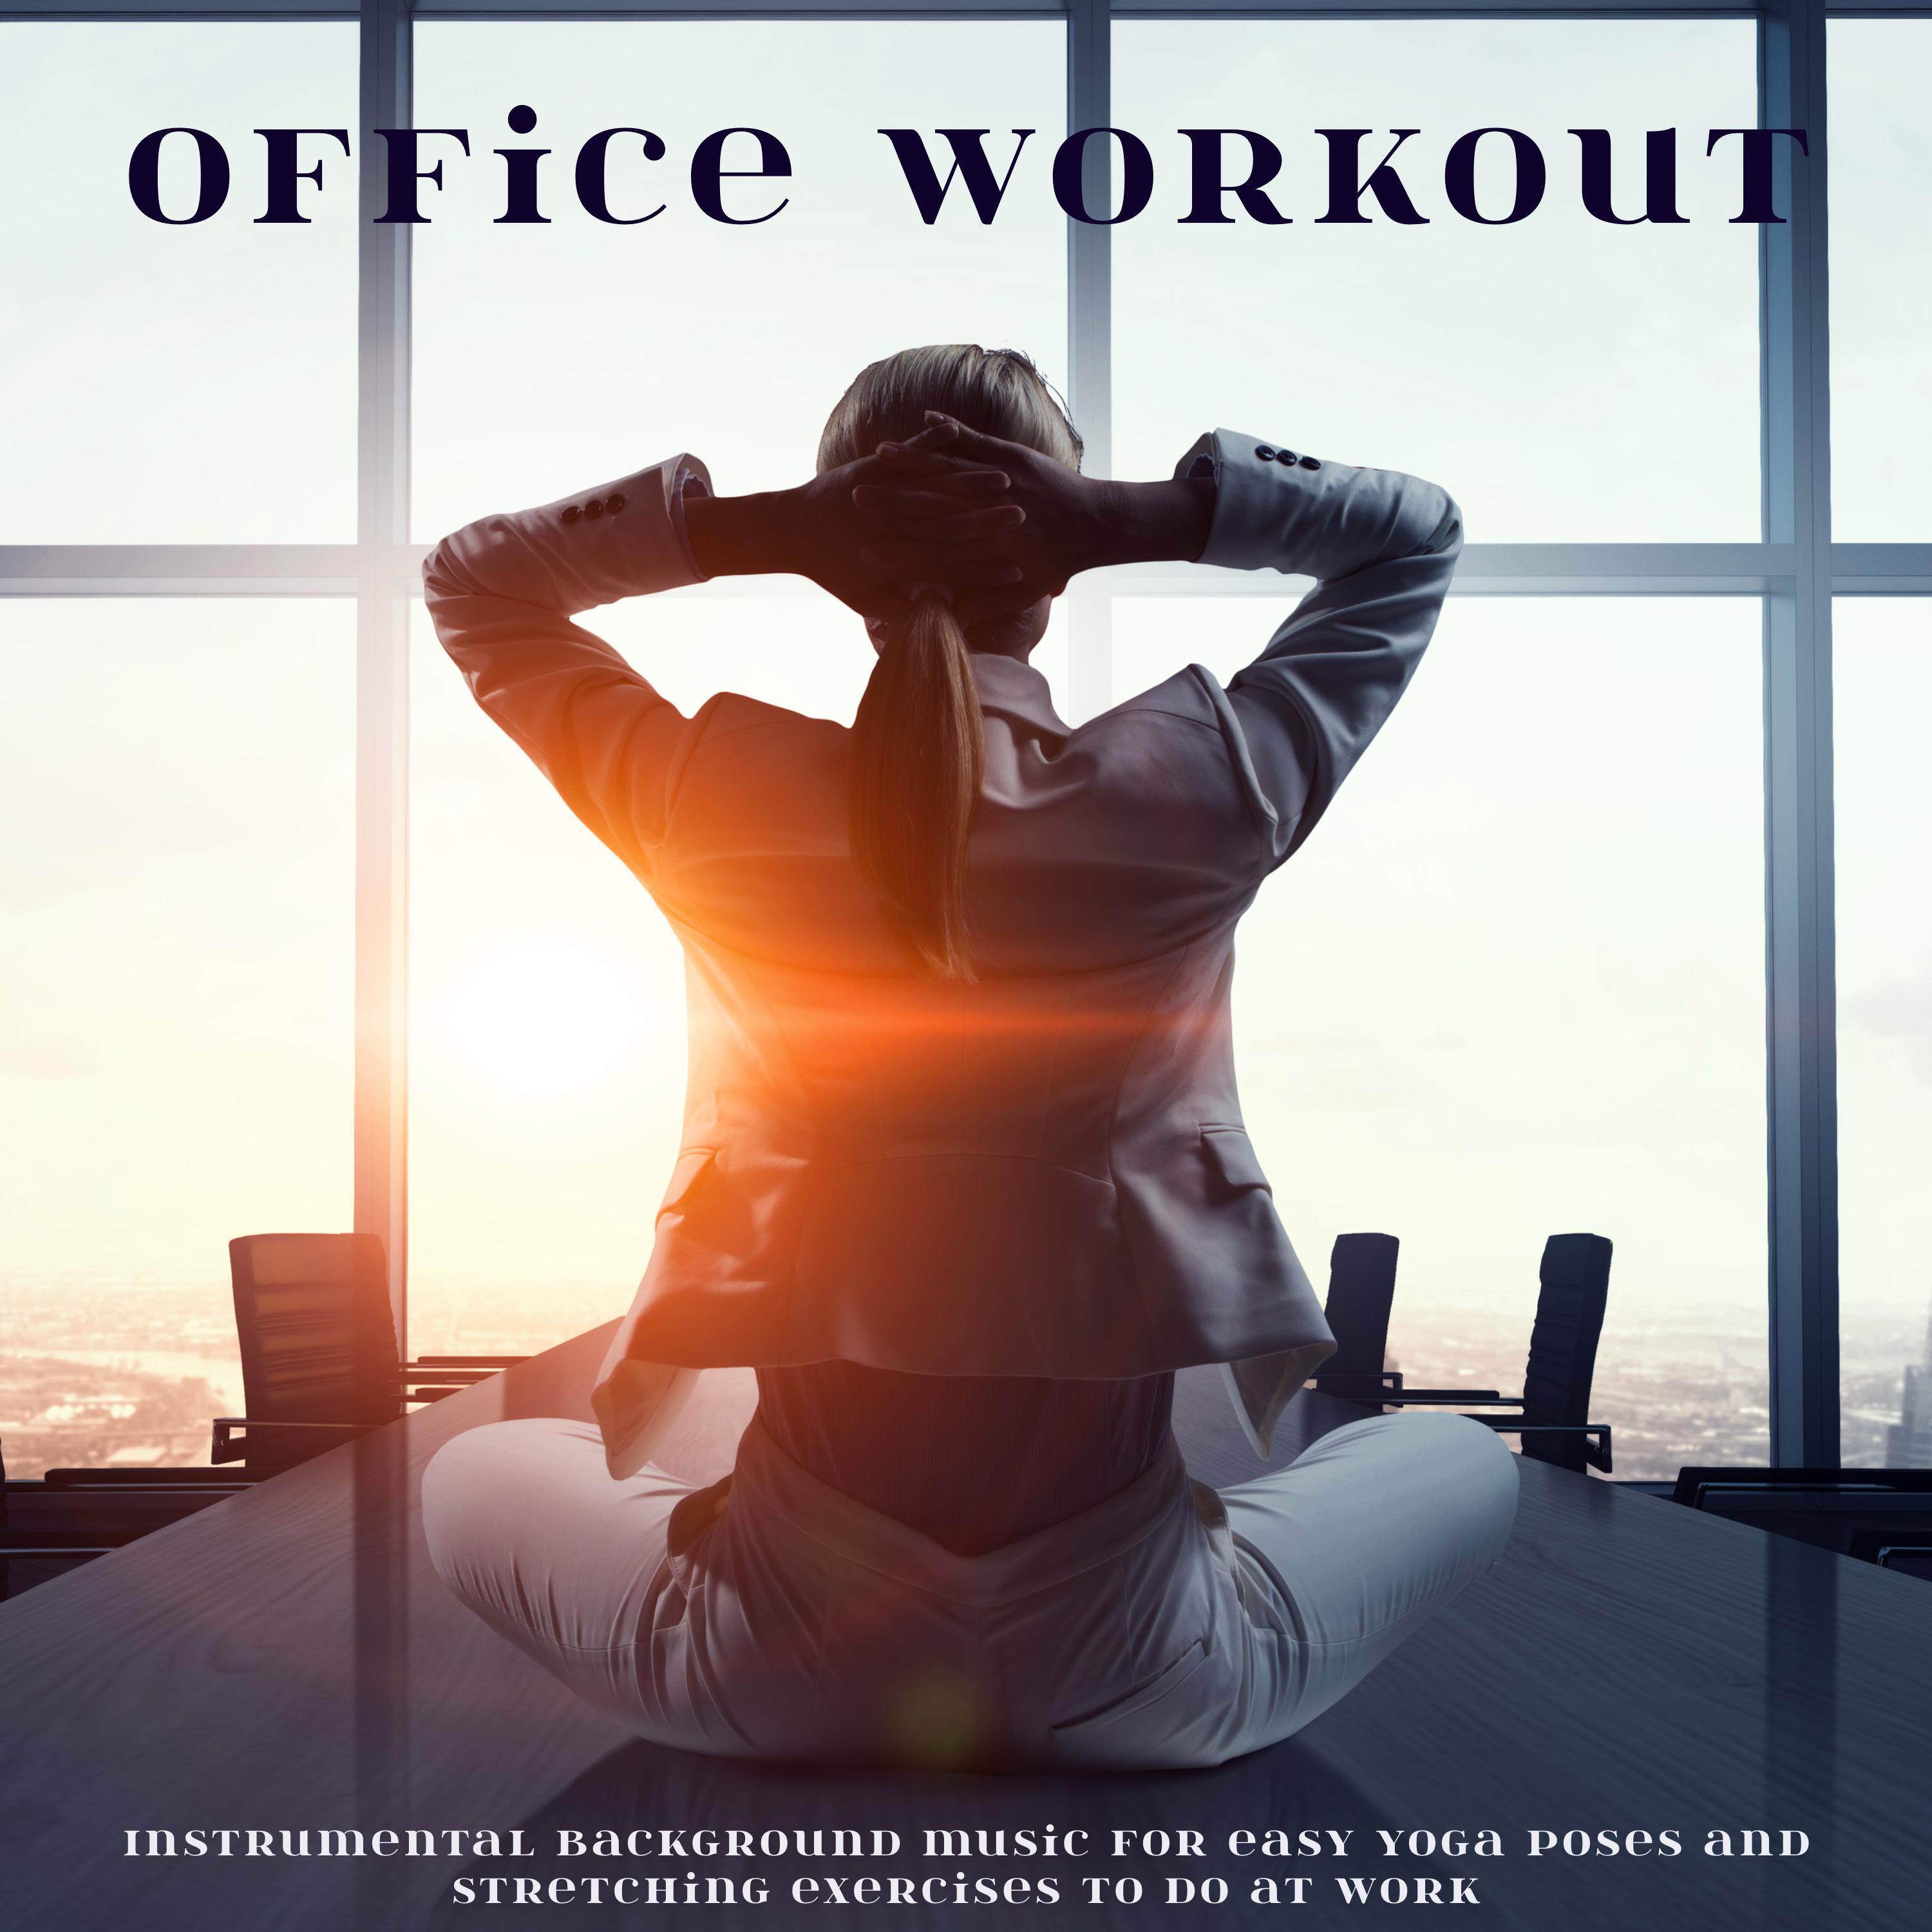 Office Workout  Instrumental Background Music for Easy Yoga Poses and Stretching Exercises to Do at Work